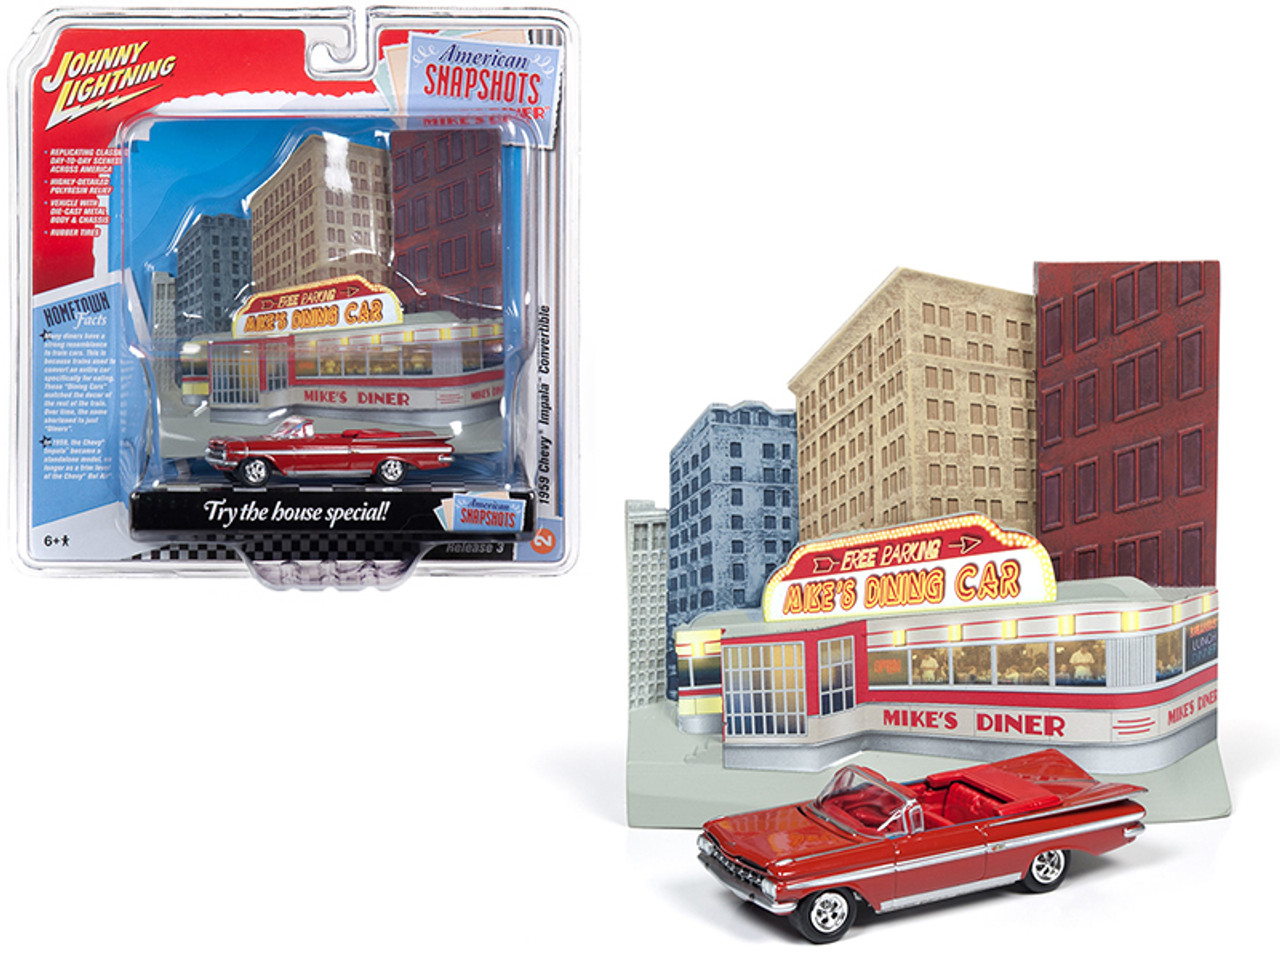 1959 Chevrolet Impala Convertible Red with "Mike’s Diner" Front Facade Diorama Set "American Snapshots" 1/64 Diecast Model Car by Johnny Lightning